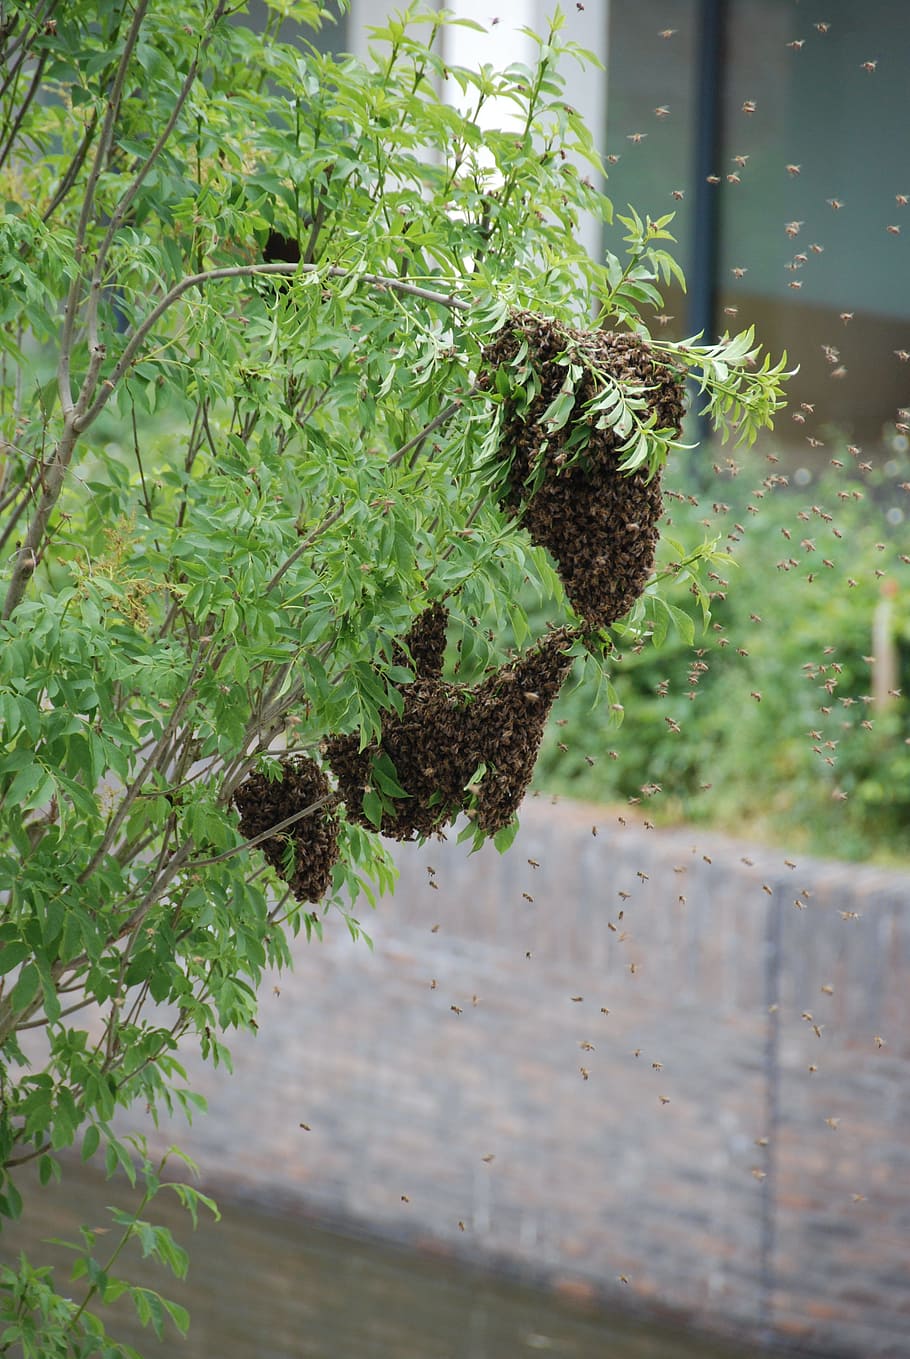 bees, swarm of bees, swarm, plant, growth, green color, nature, day, leaf, plant part